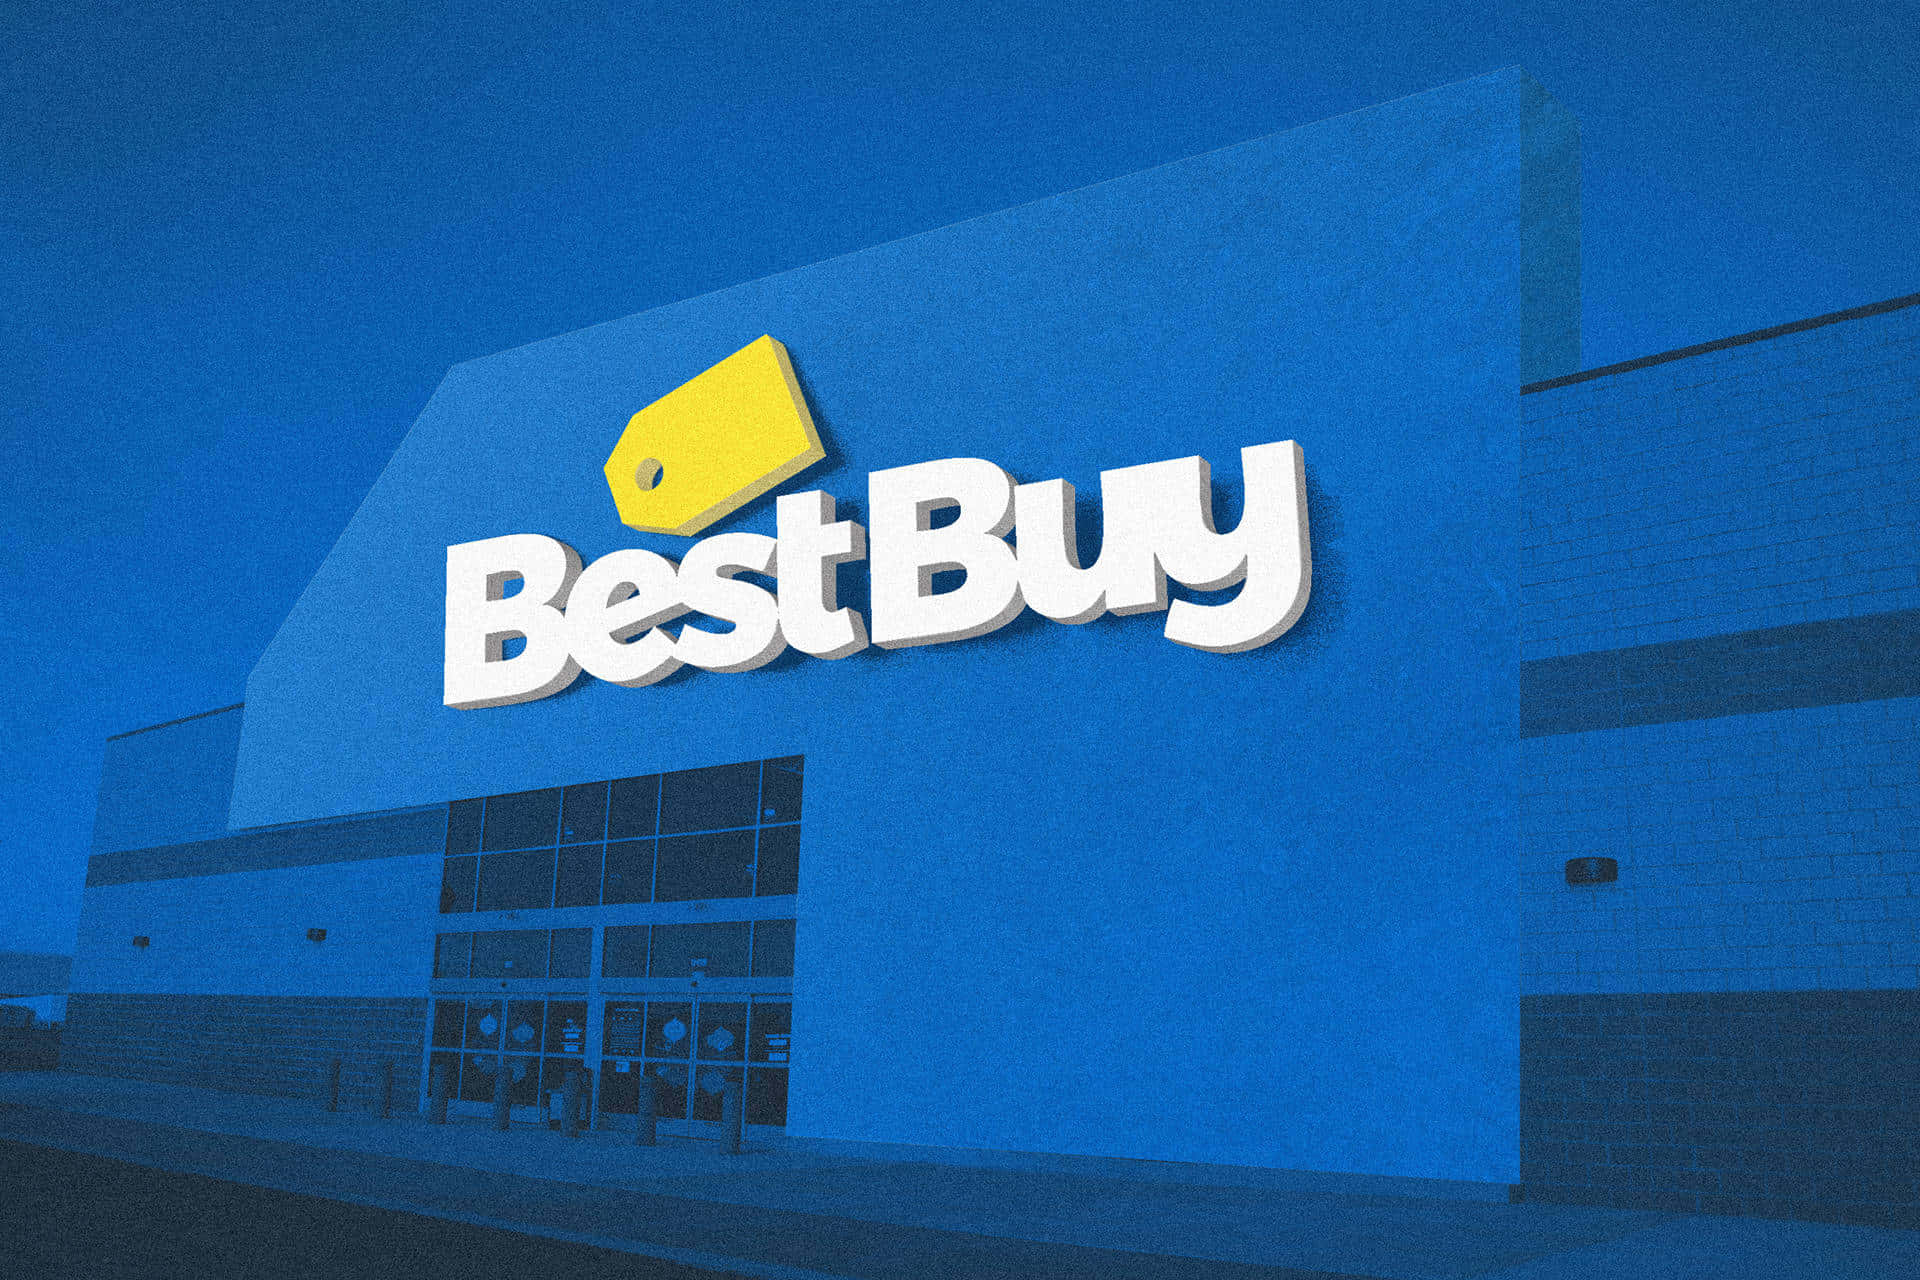 Get the best deals on all your favorite products at Best Buy.